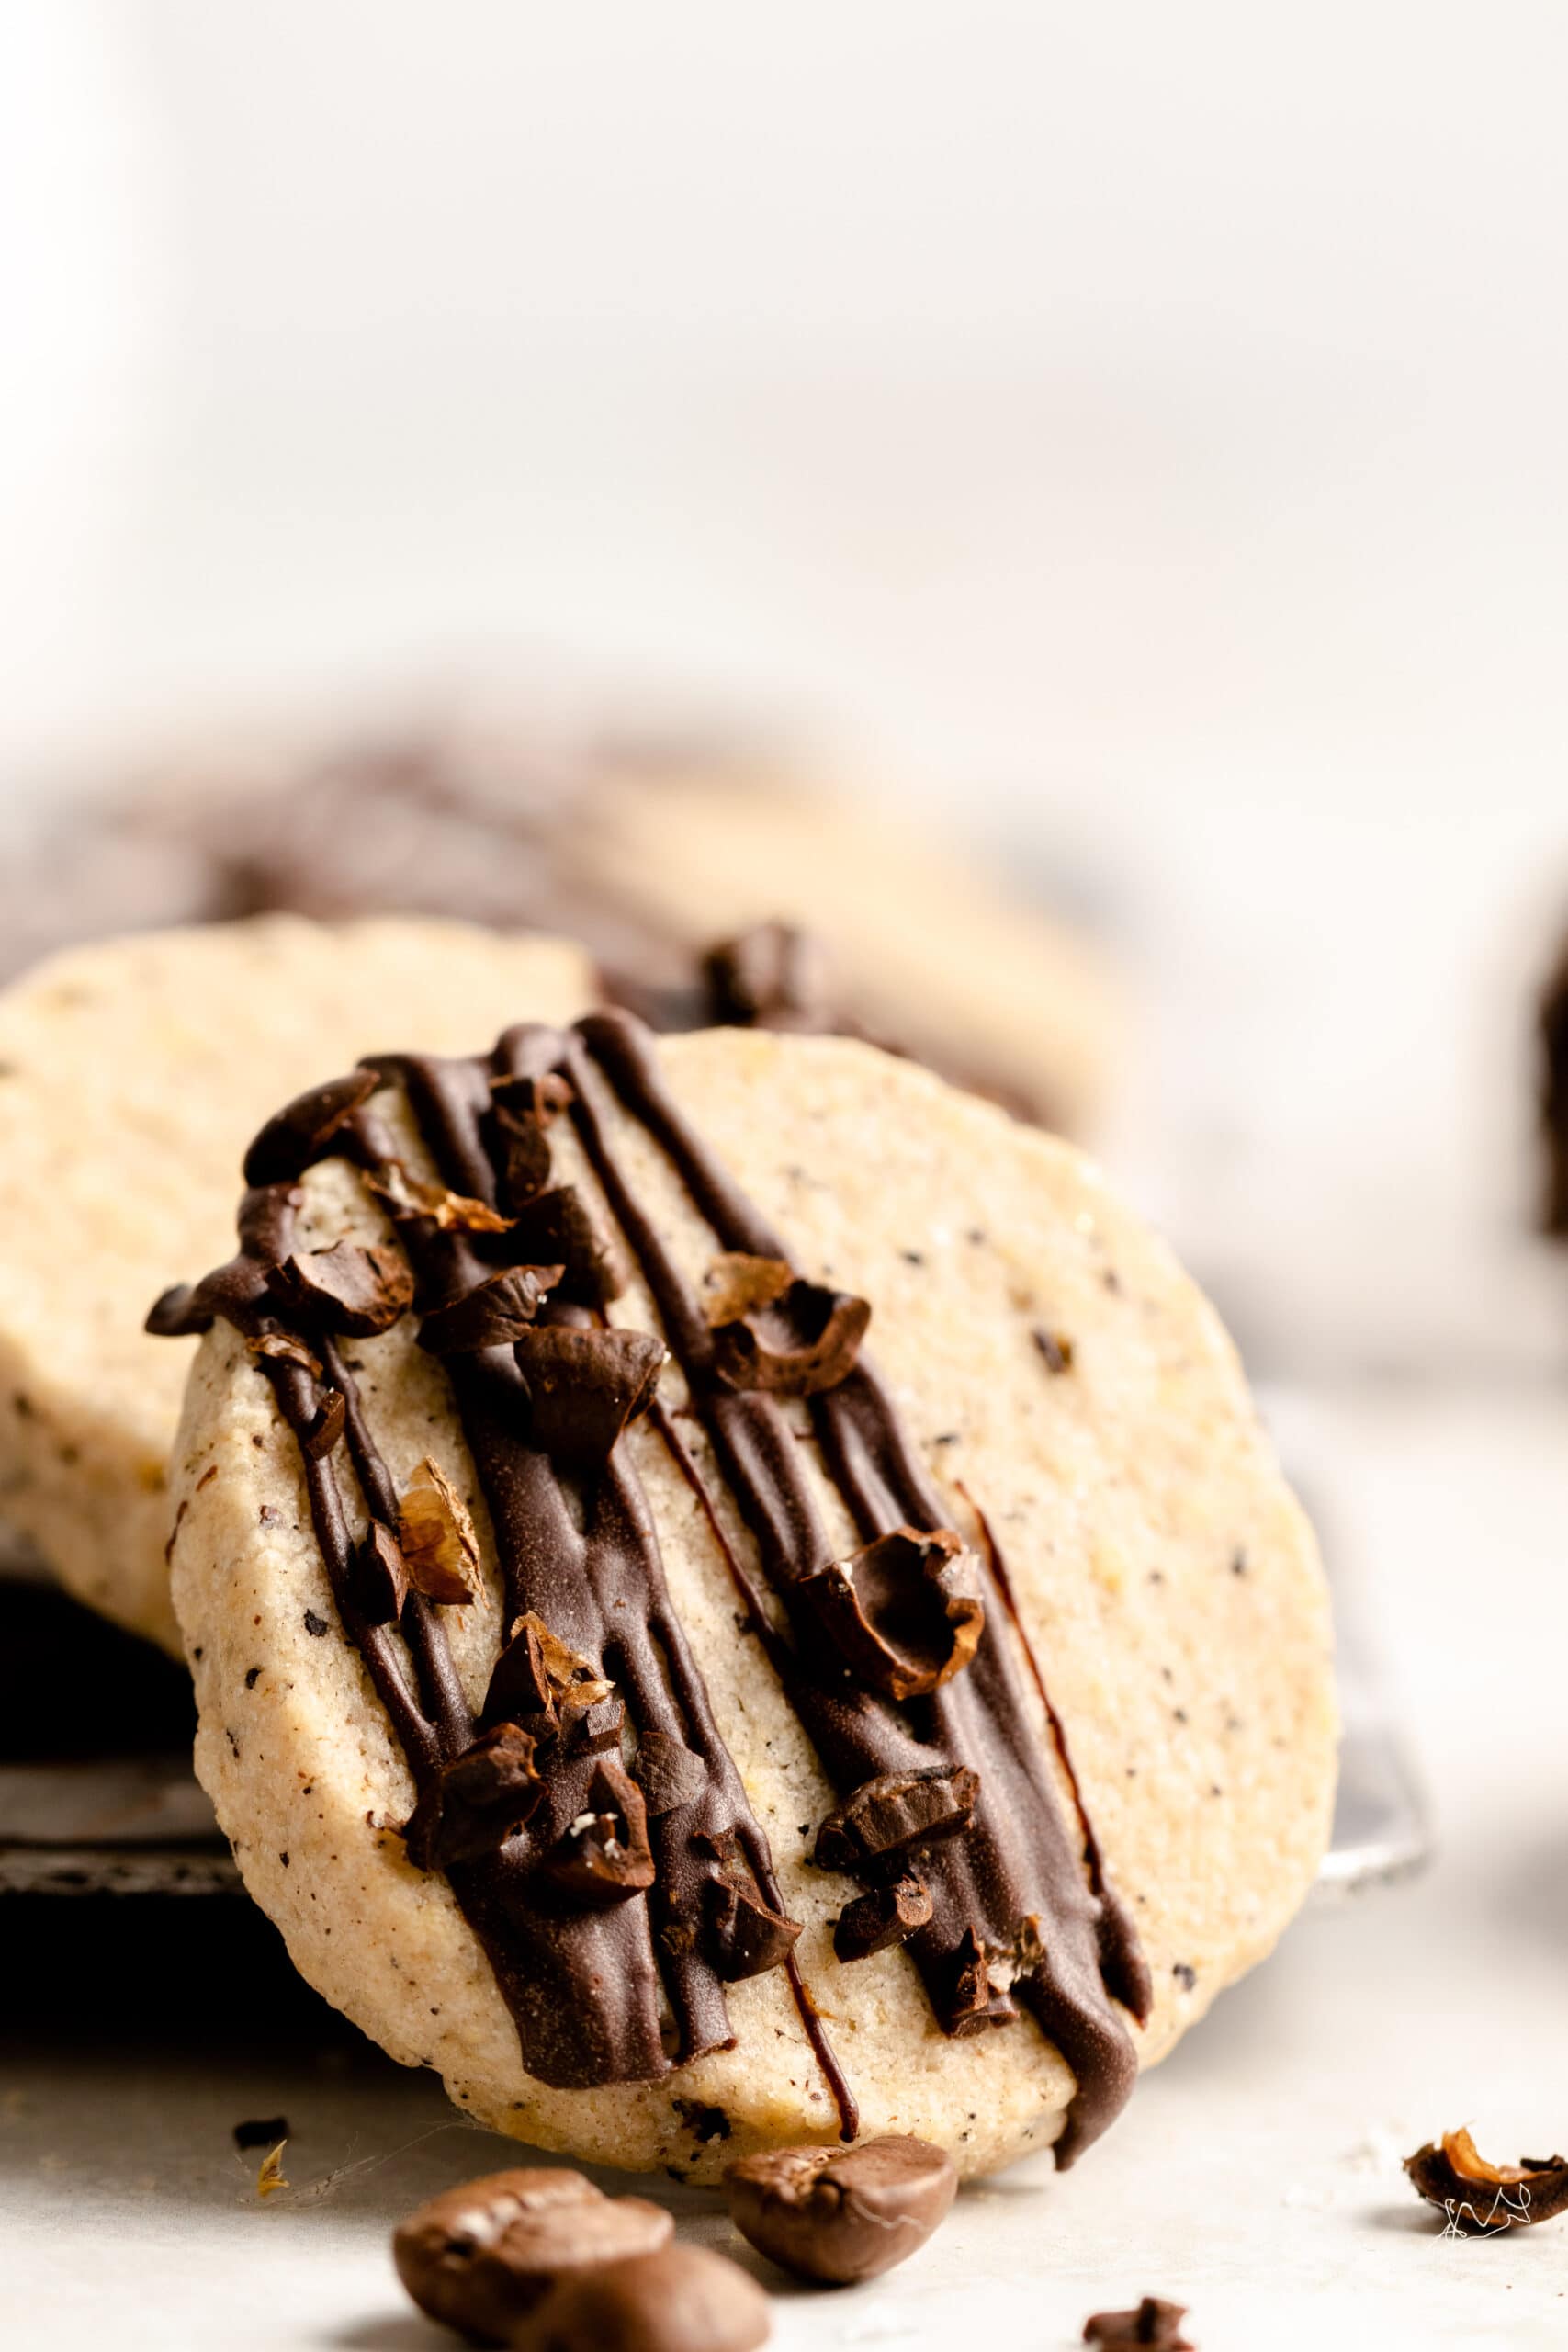 Side view of Slice and Bake espresso cookie with chocolate drizzle and chopped espresso.